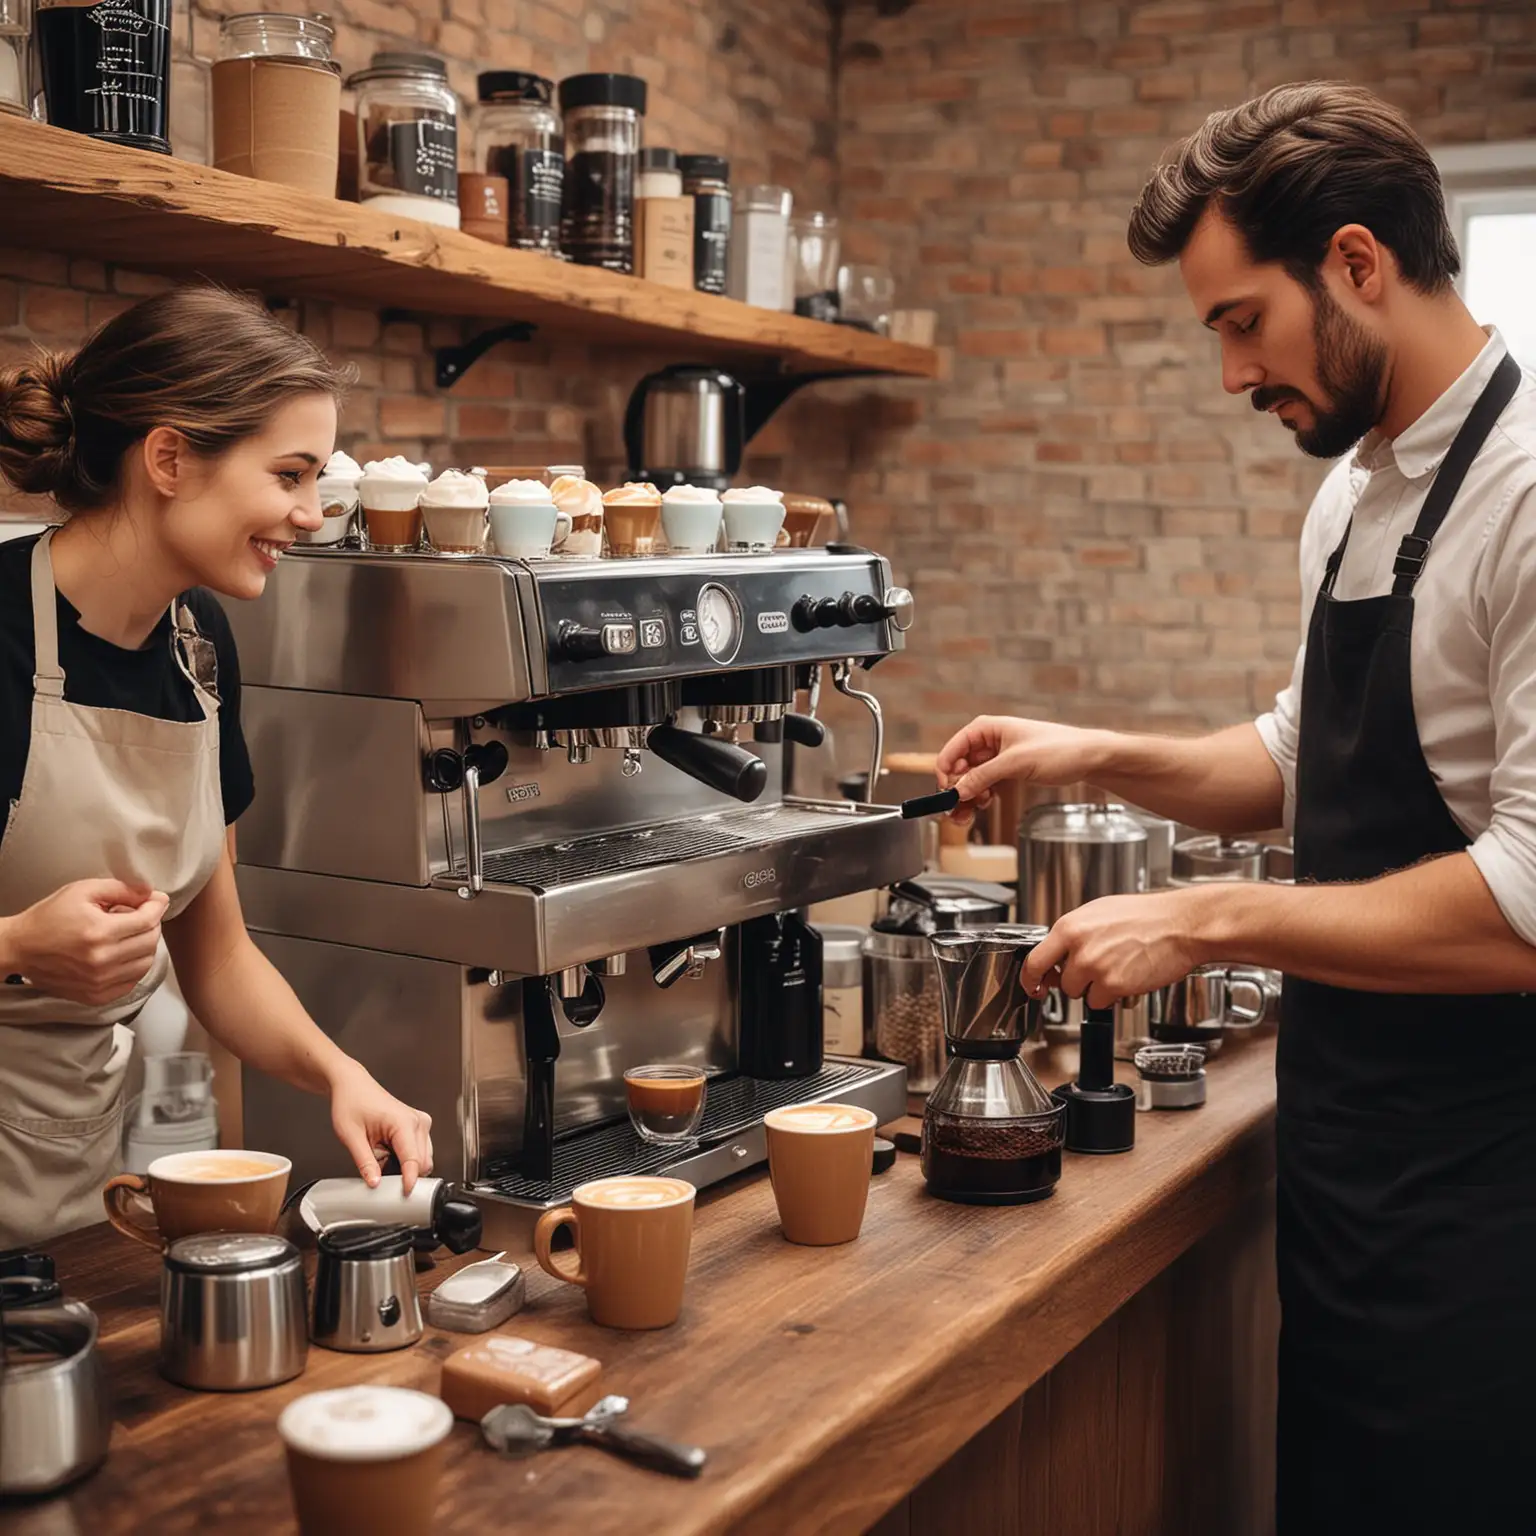 Show me a couple o baristas preparing single origin cups of coffee. Show a cozy coffee shop in the background with professional coffee machines and a coffee grinder